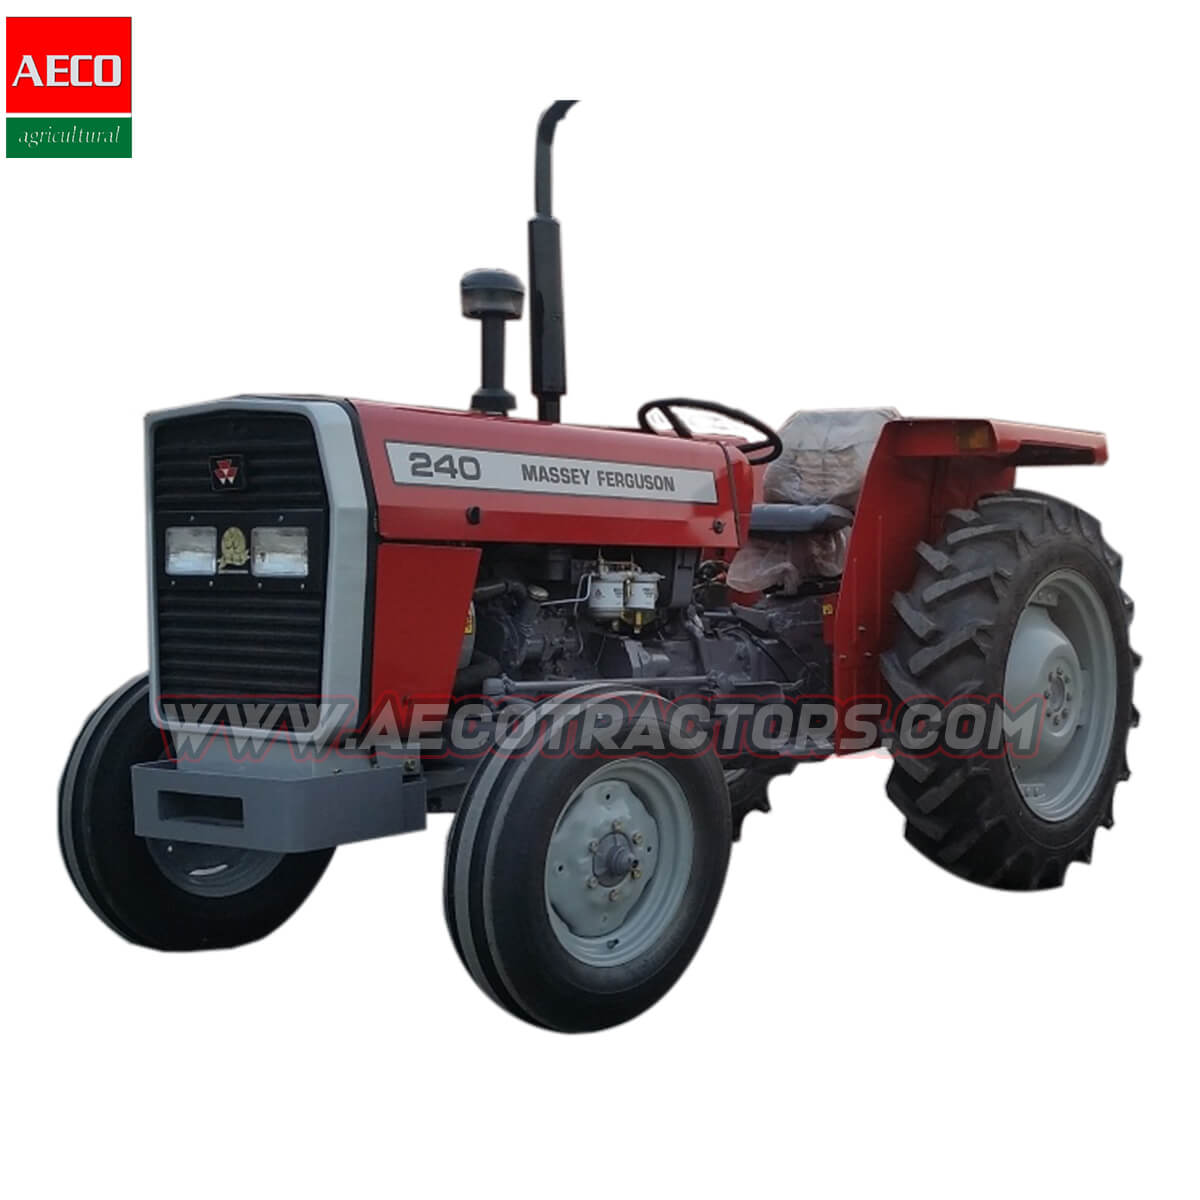 Revolutionize Your Farming with the 240 Massey Ferguson Tractor